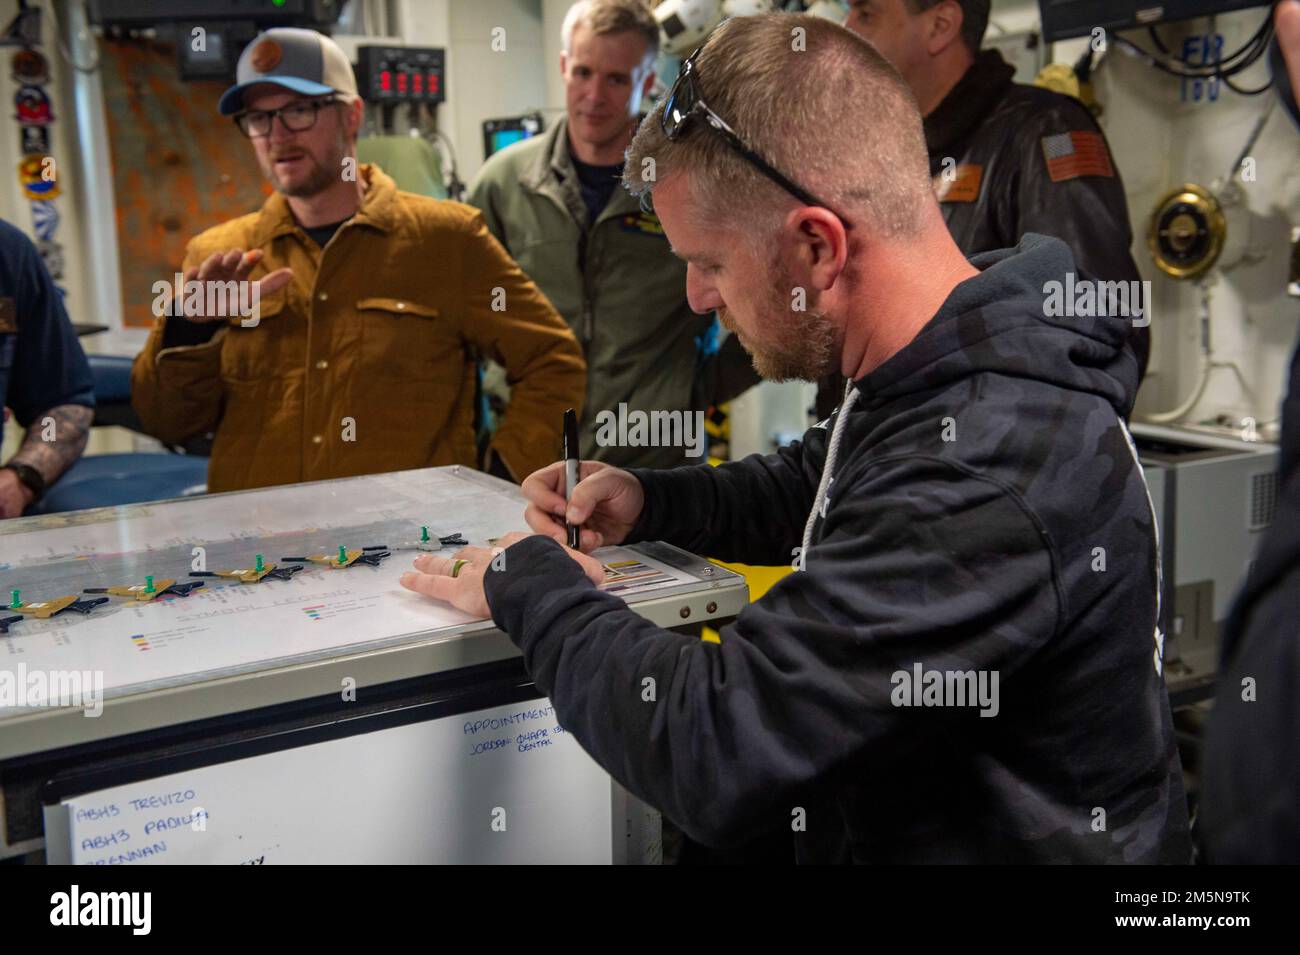 220329-N-OL632-1060 NAVAL STATION NORFOLK (March 29, 2022) NASCAR Xfinity Series driver Justin Allgaier, signs an autograph during a visit to the aircraft carrier USS George H.W. Bush (CVN 77), March 29, 2022. George H.W. Bush provides the national command authority flexible, tailorable war fighting capability as the flagship of the carrier strike group which maintains maritime stability and security in order to ensure access, deter aggression and defend U.S., allied and partner interests. Stock Photo